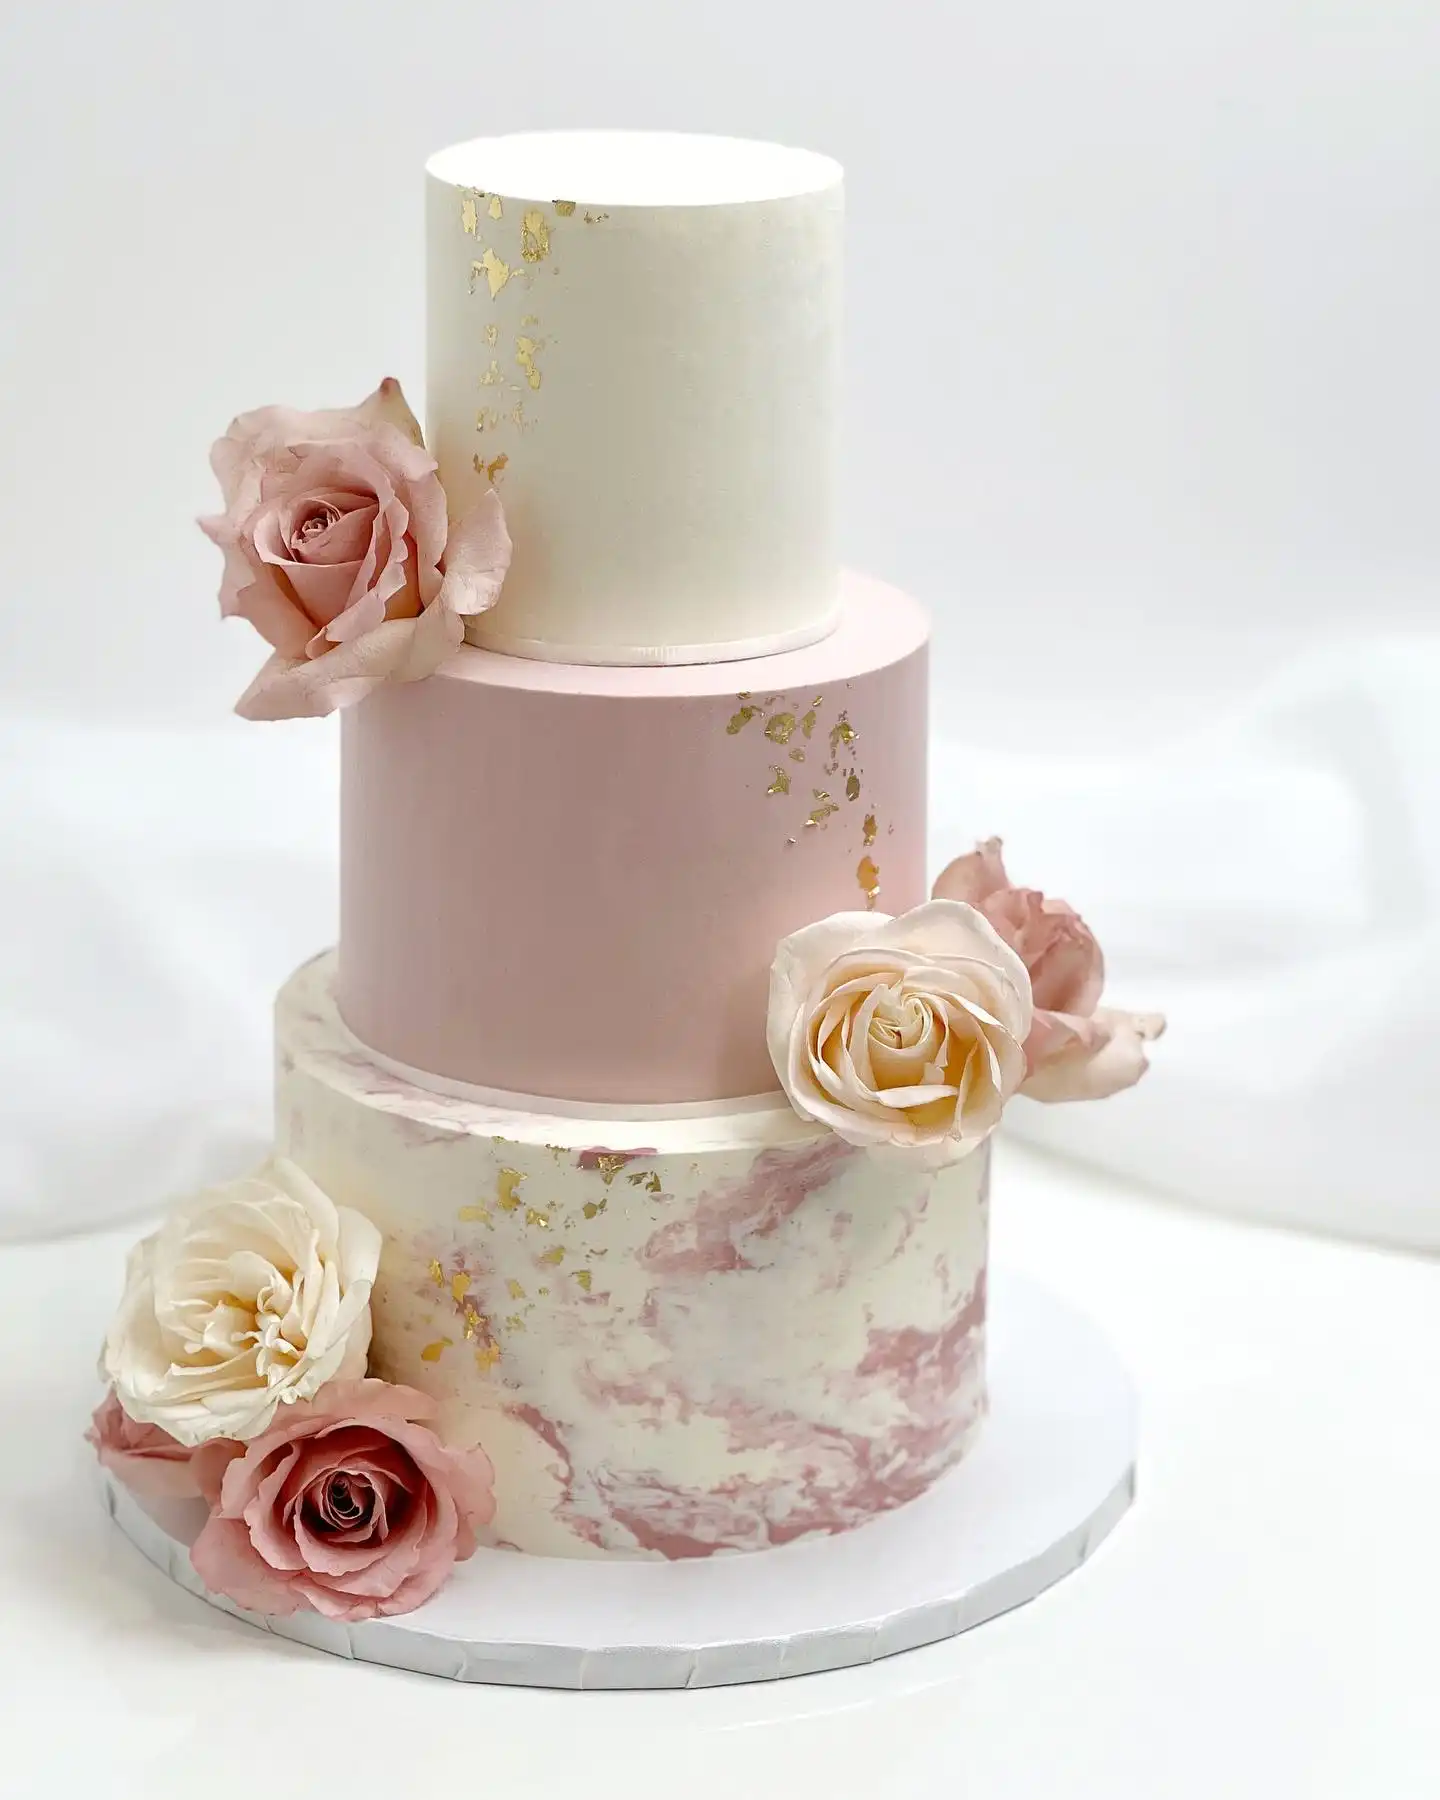 Gallery image of a cake